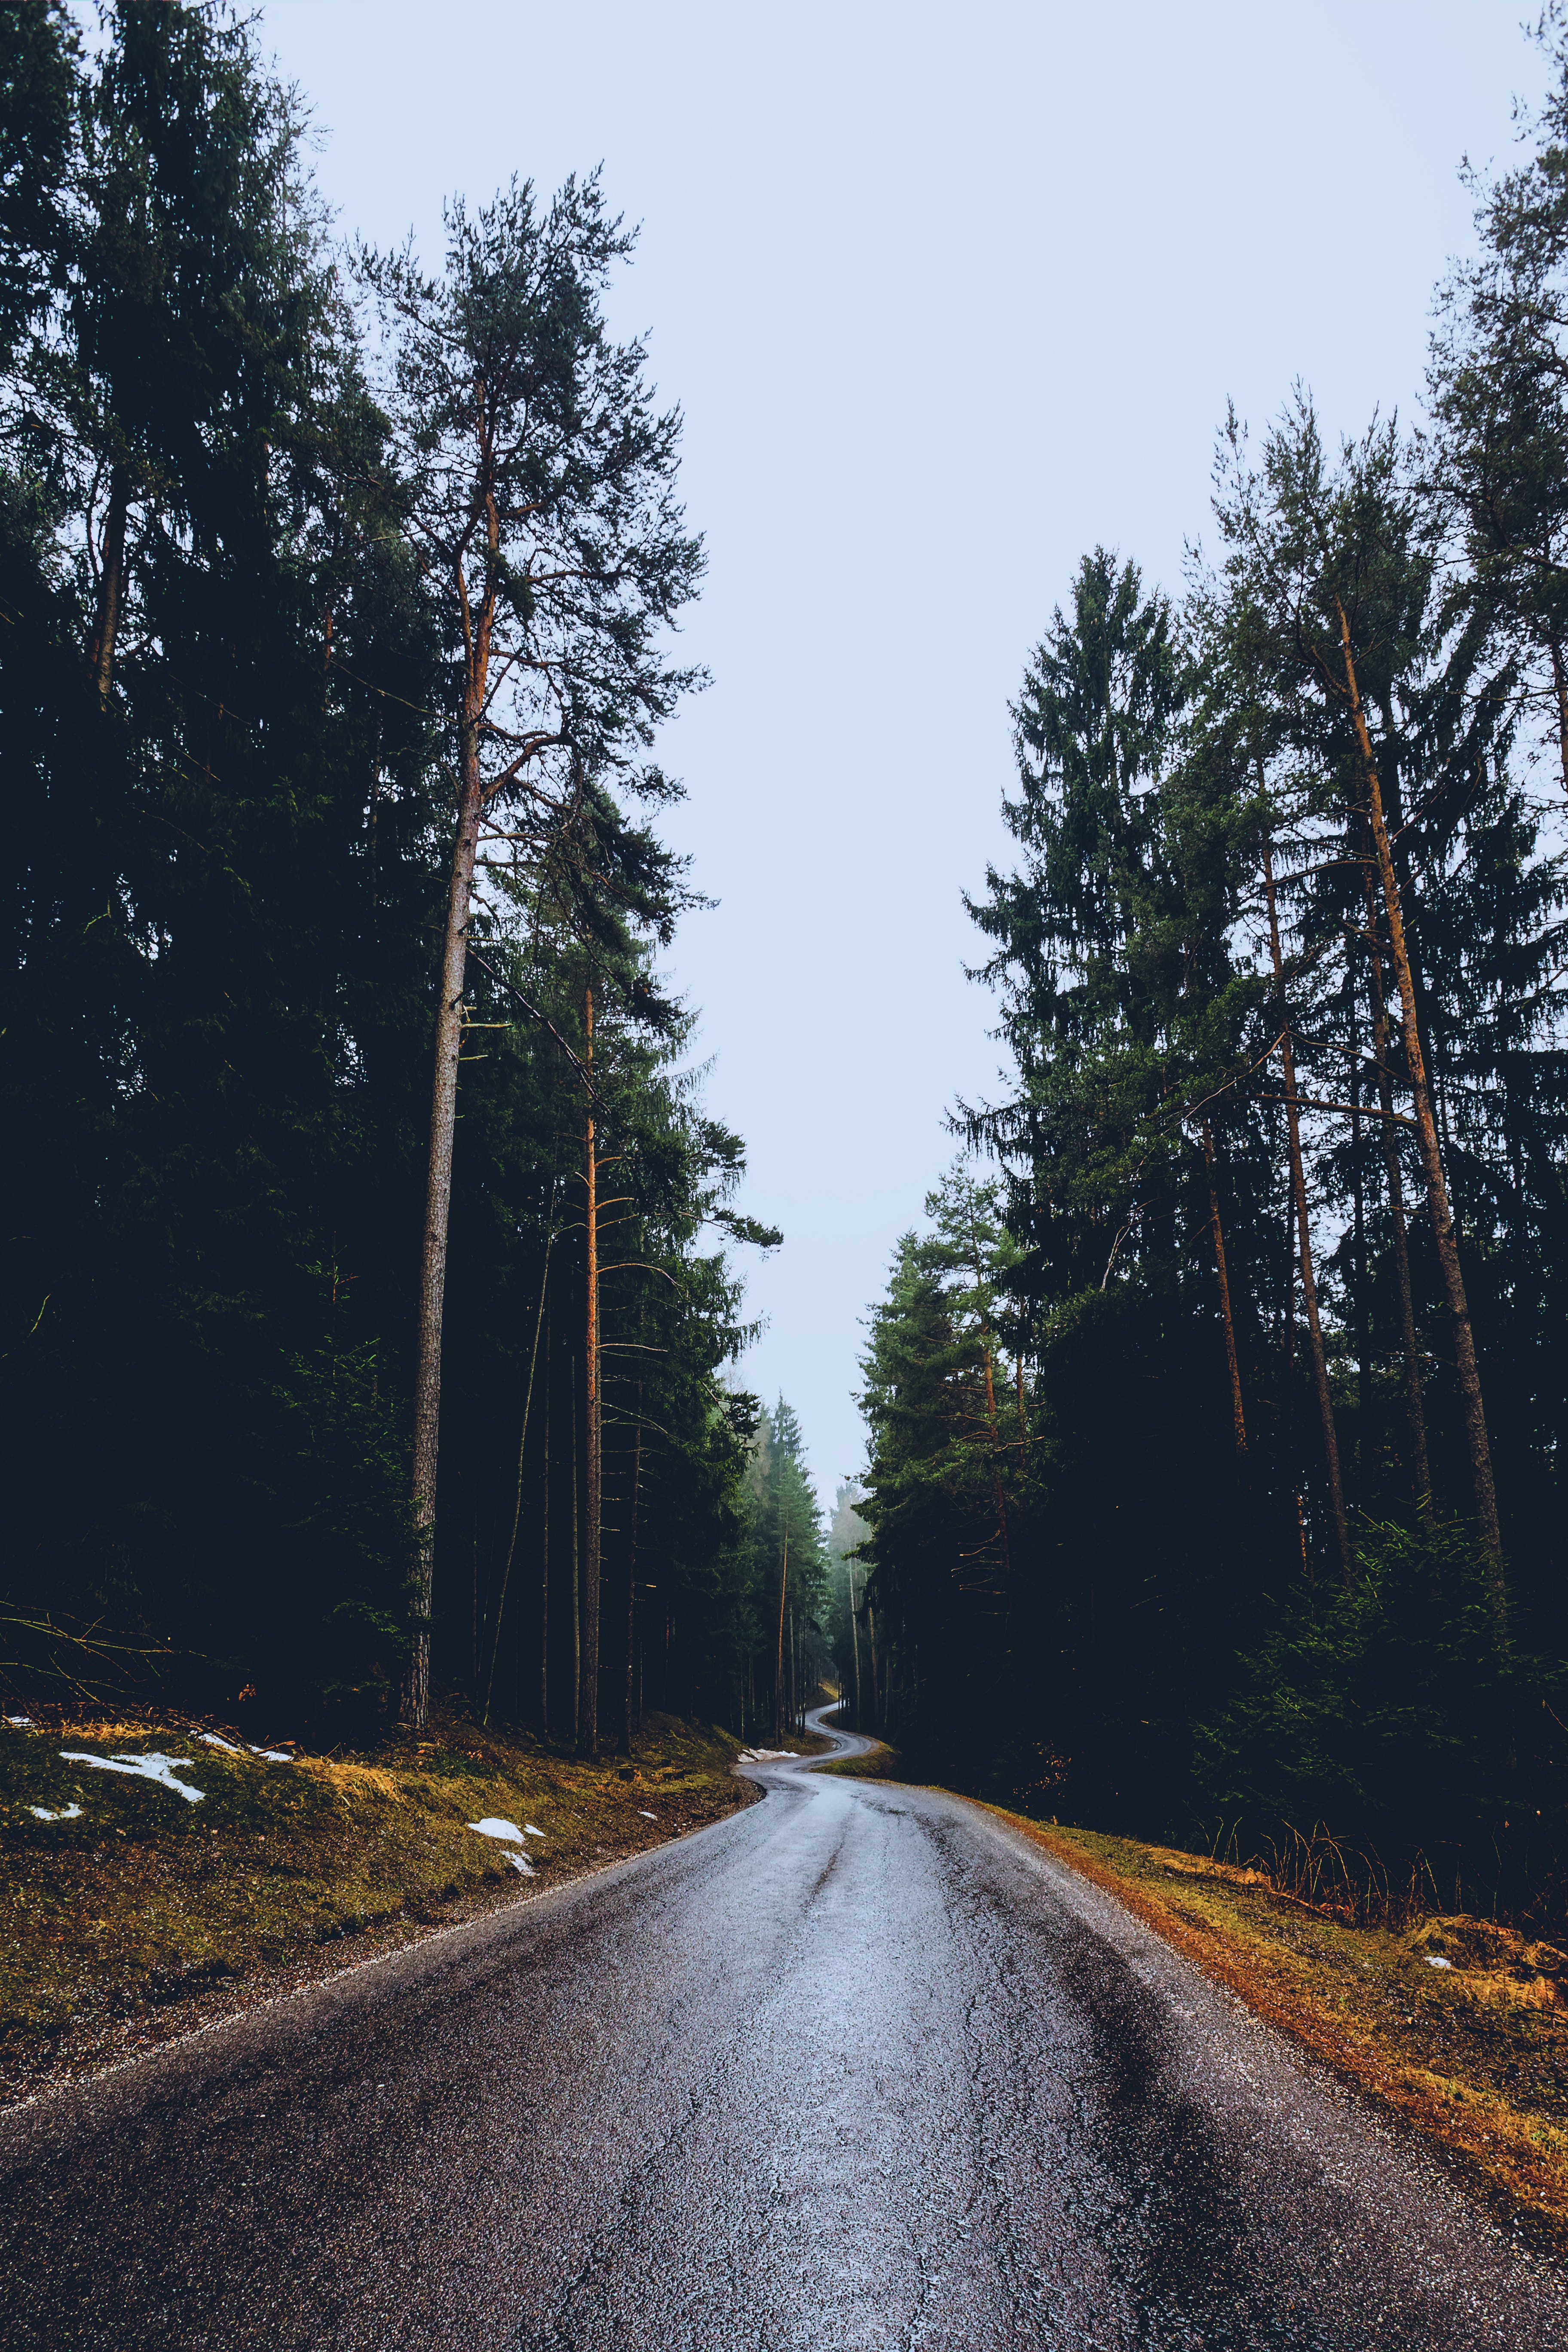 trees, nature, road, wet, asphalt, spring, winding, sinuous, humid